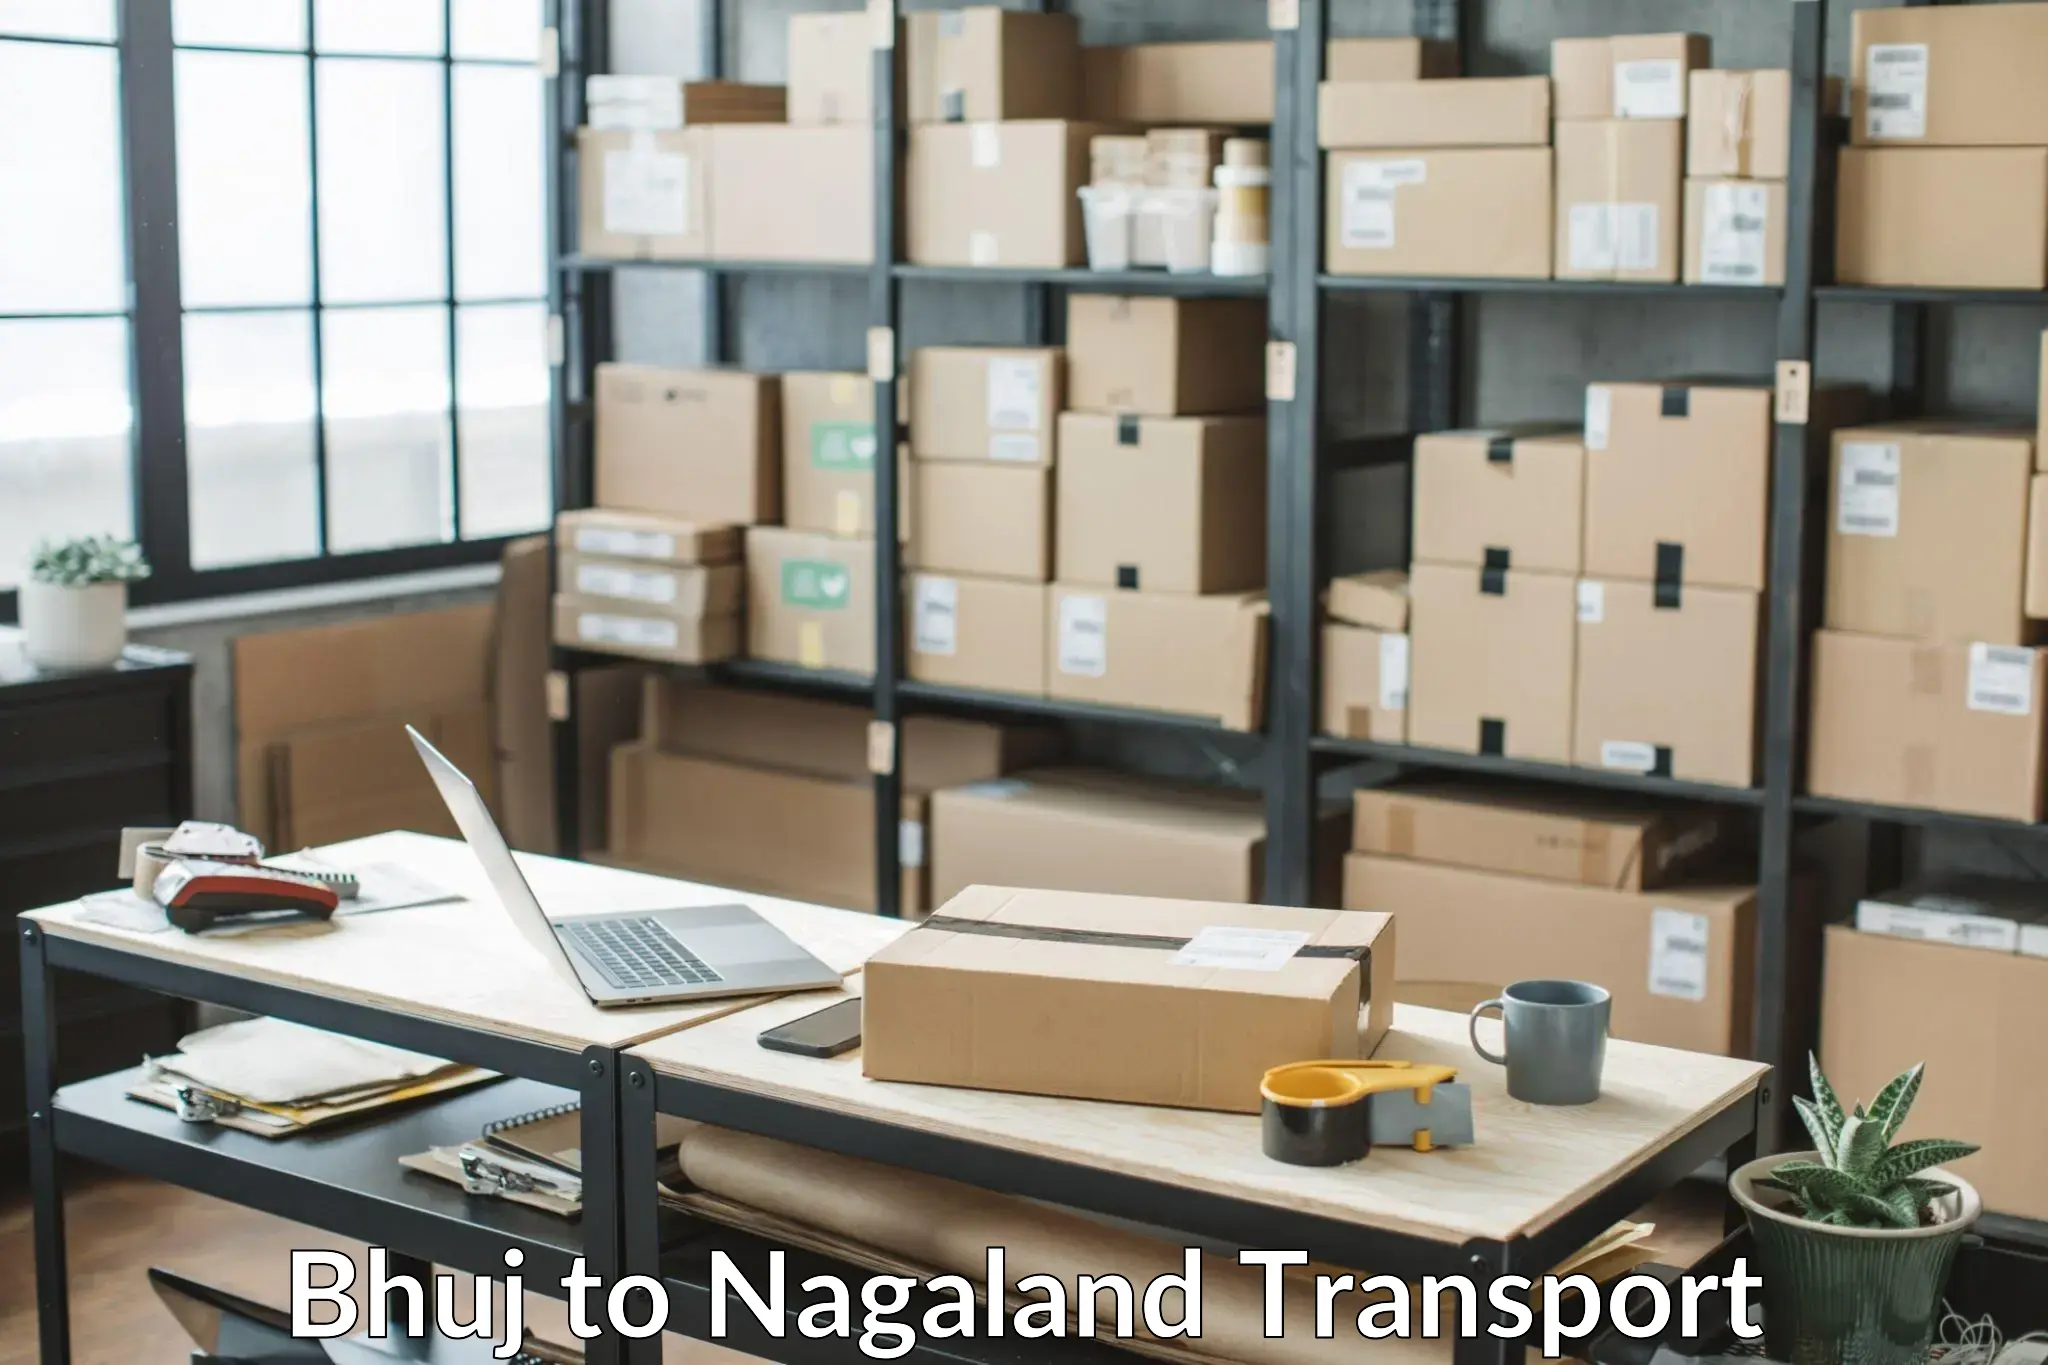 Delivery service Bhuj to Nagaland